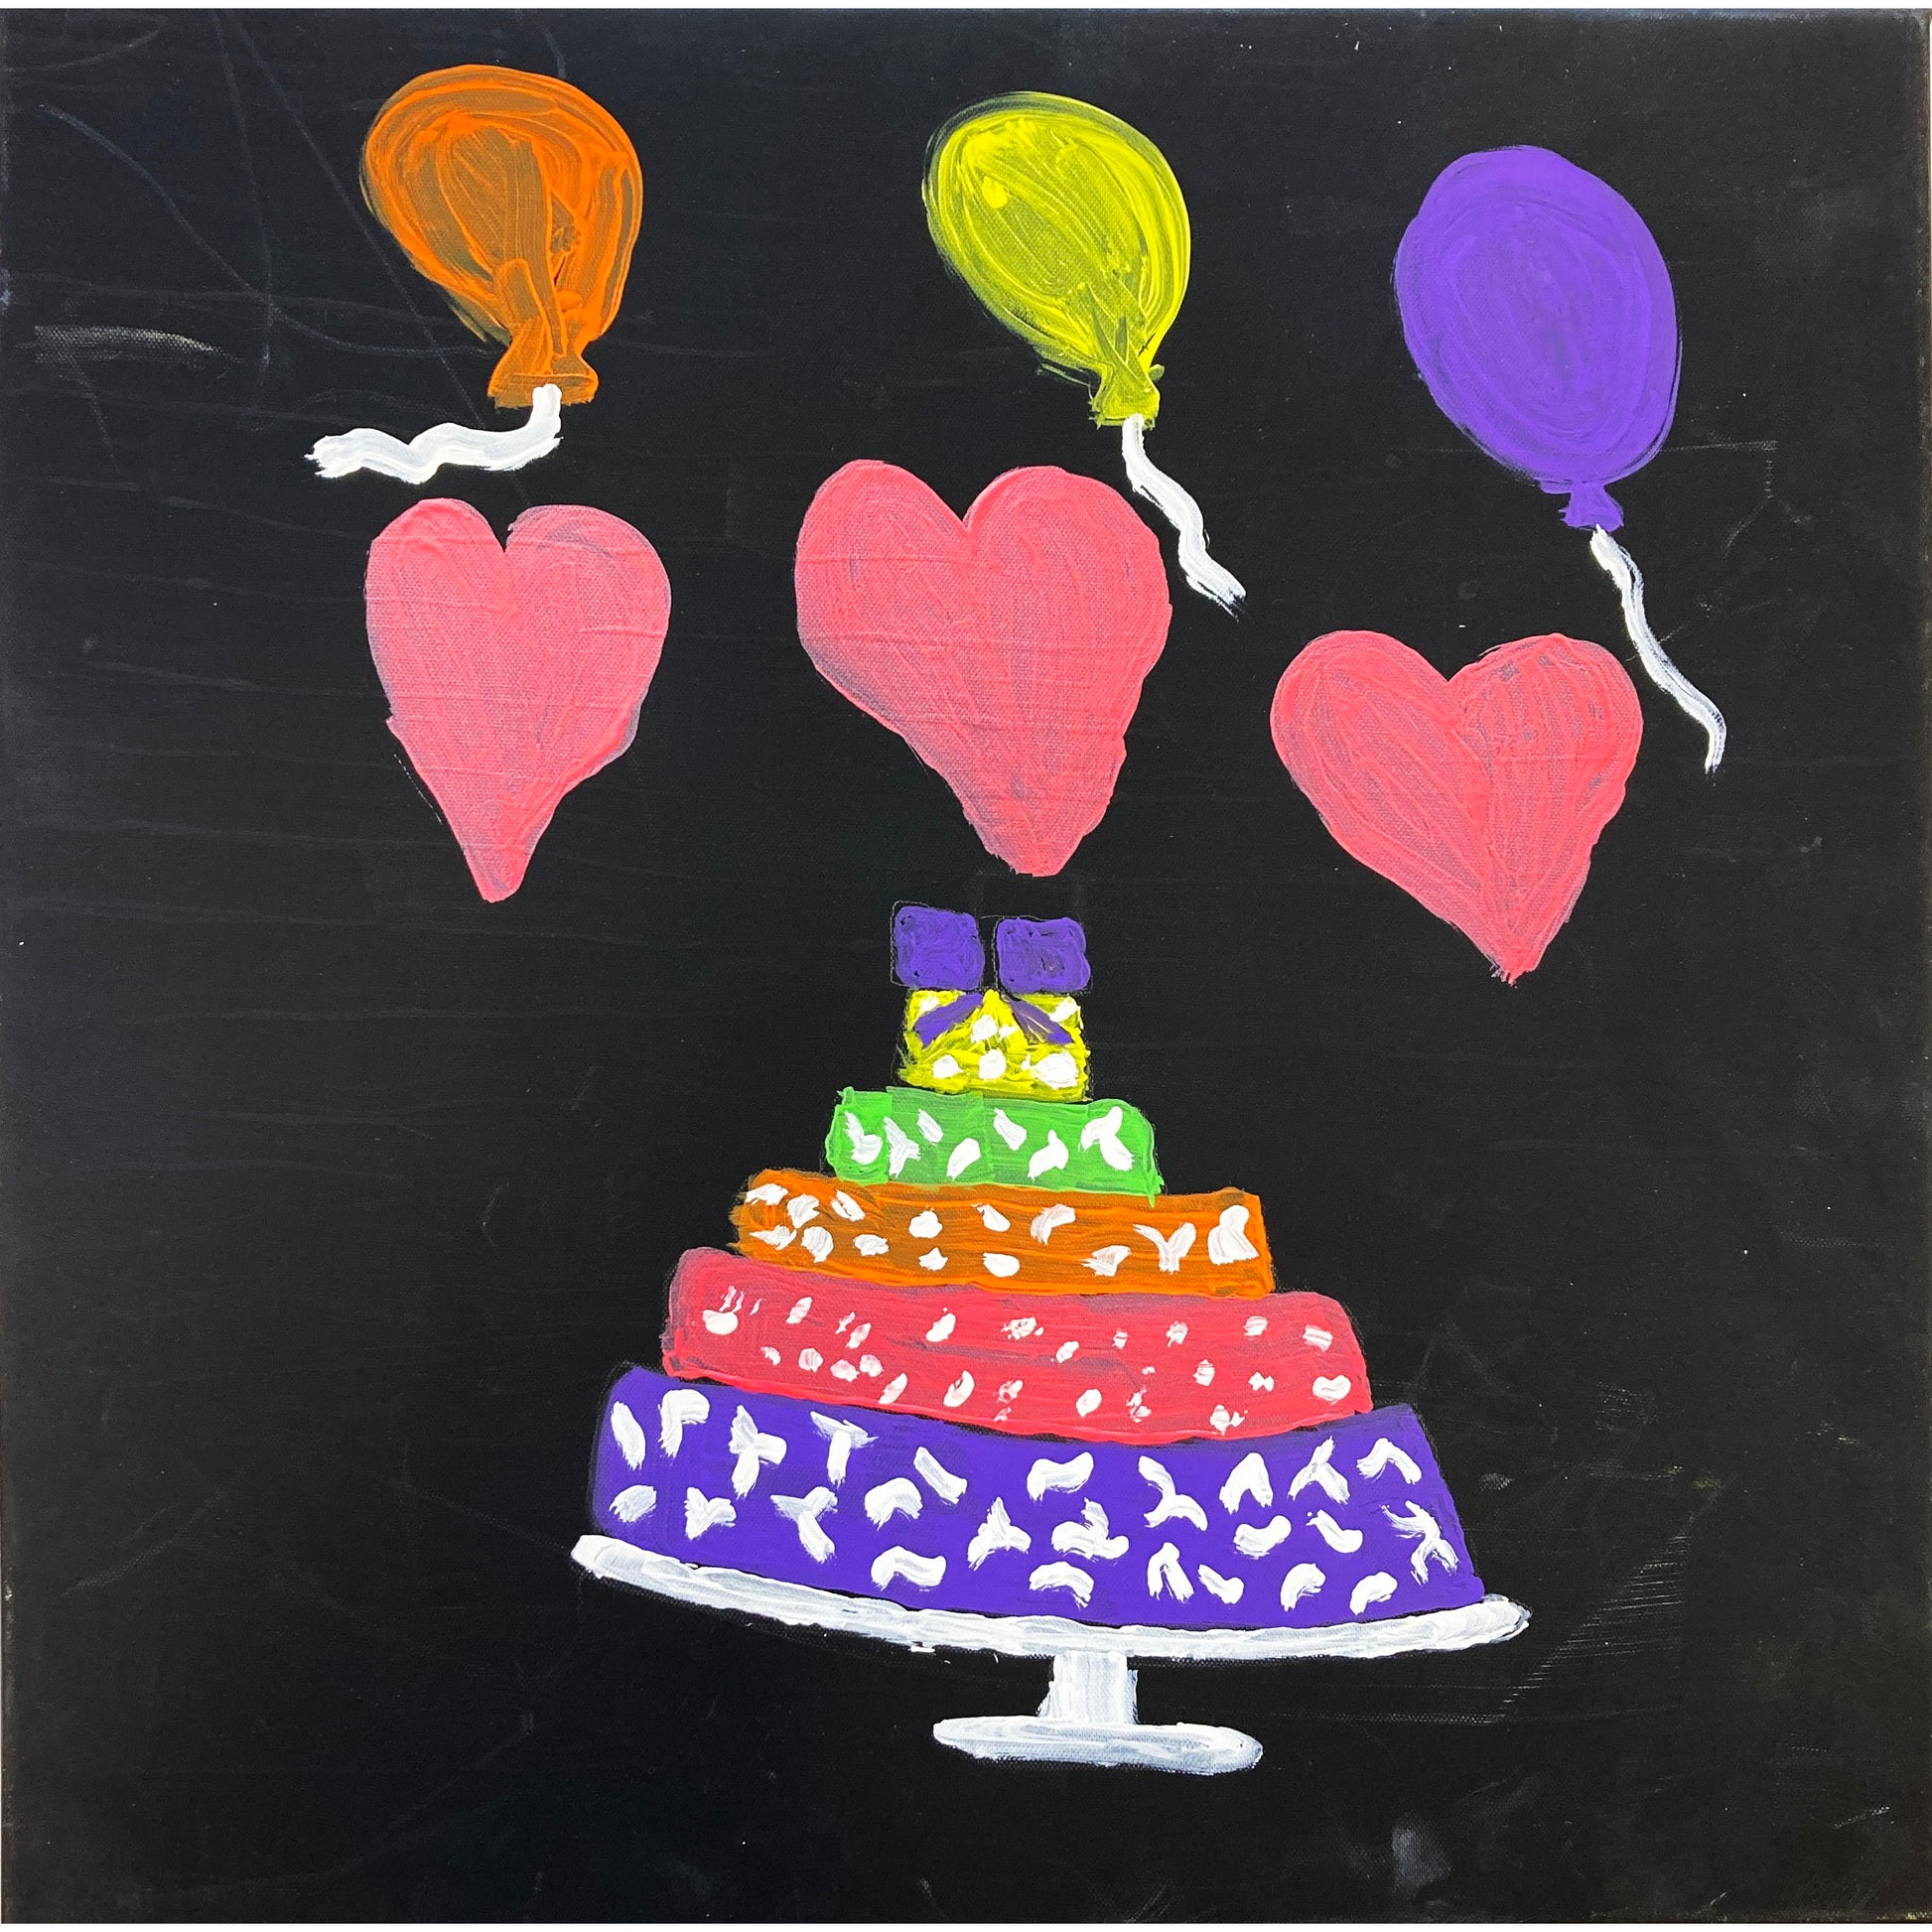 WATCH Resources Art Guild - Acrylic Paint on Stretched Canvas, 18 x 18 Original Fine Art, Birthday Cake Party made by Jim Wilbanks